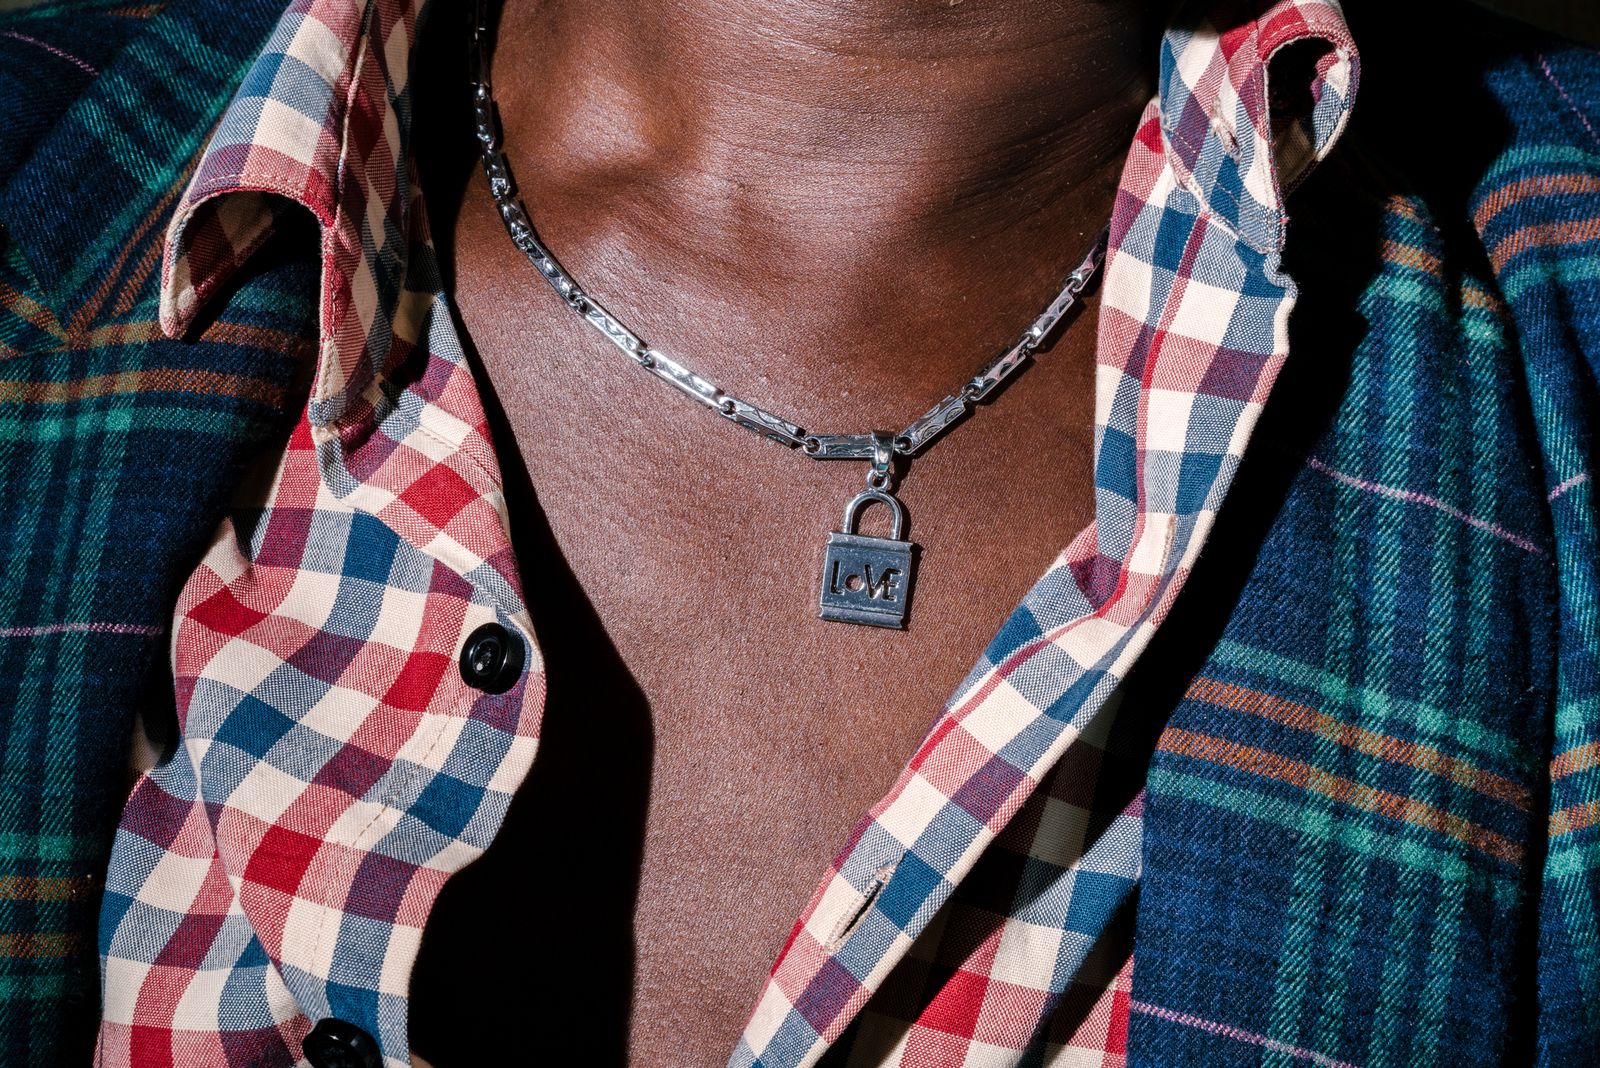 © Jake Naughton - Sweet Love, a transgender woman, poses for a portrait wearing a necklace from her partner.